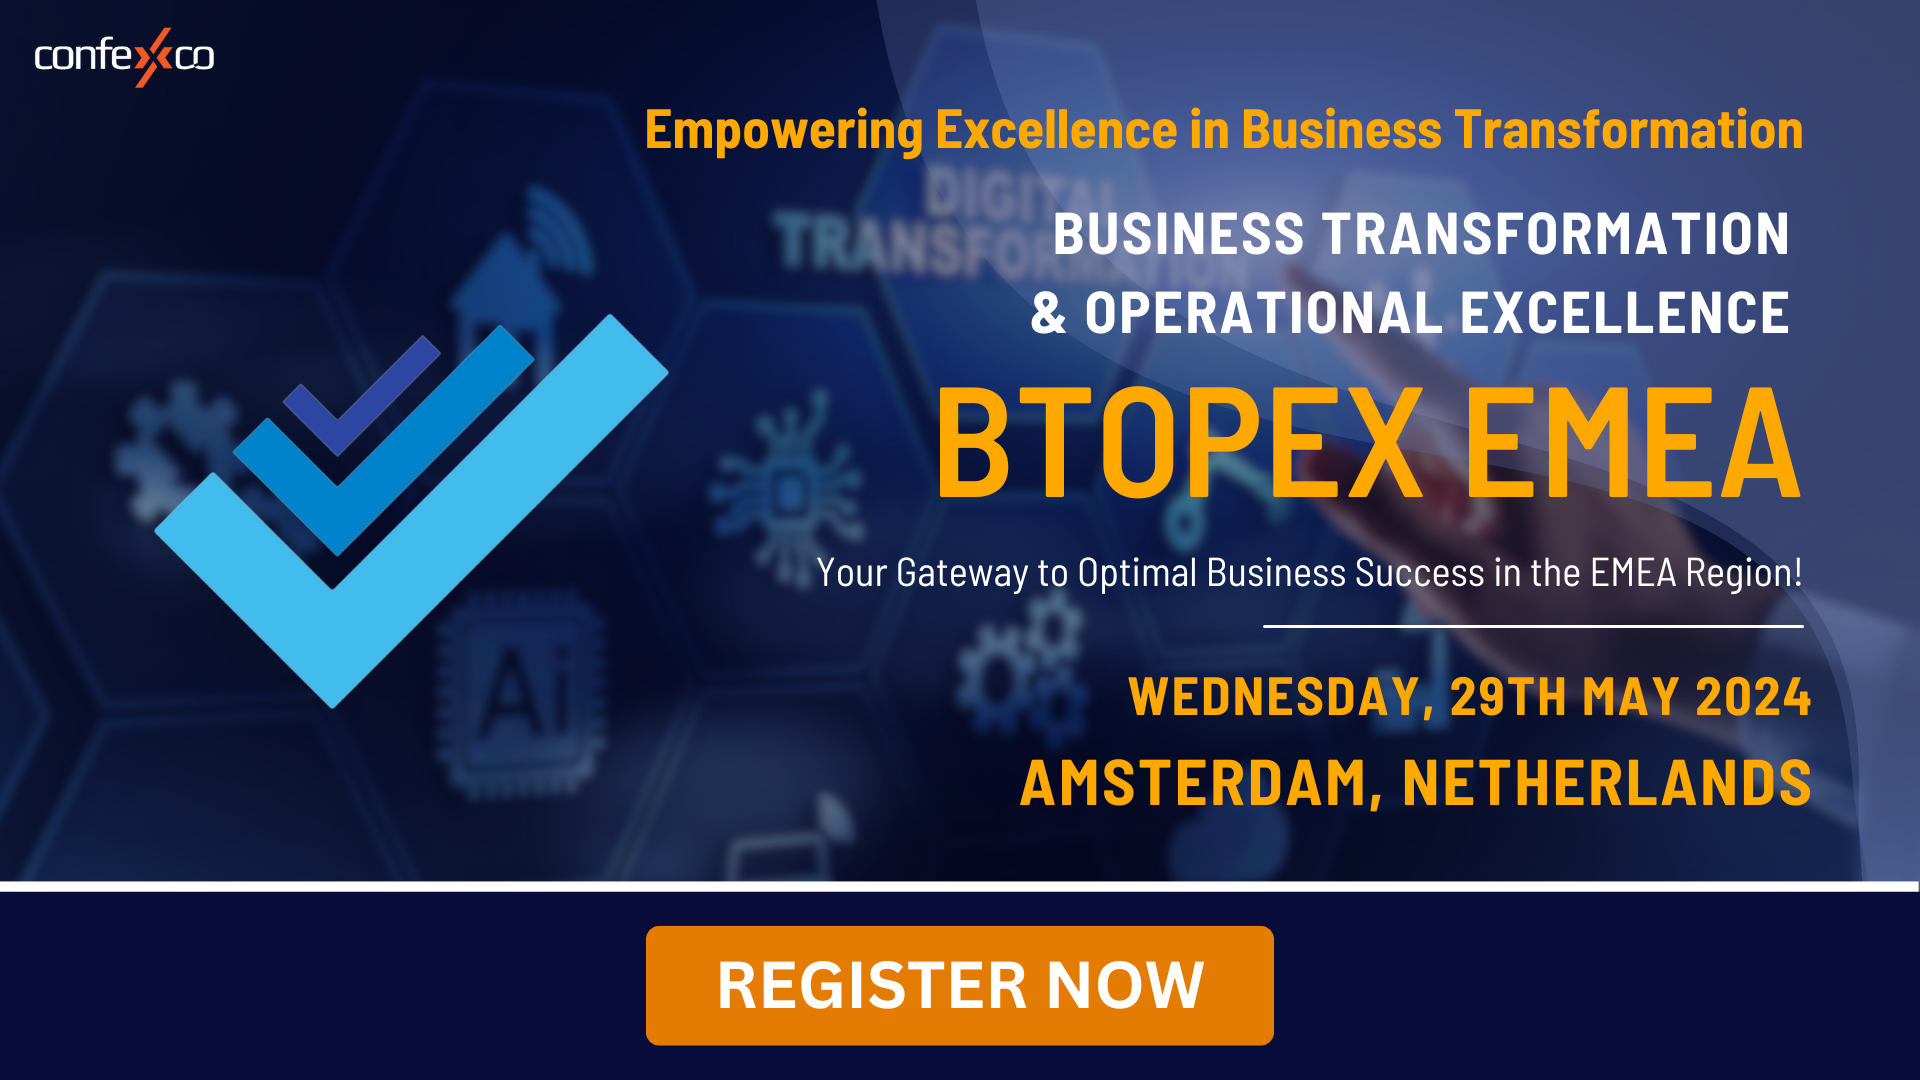 Business Transformation & Operational Excellence (BTOPEX) EMEA Summit, Amsterdam, Netherlands